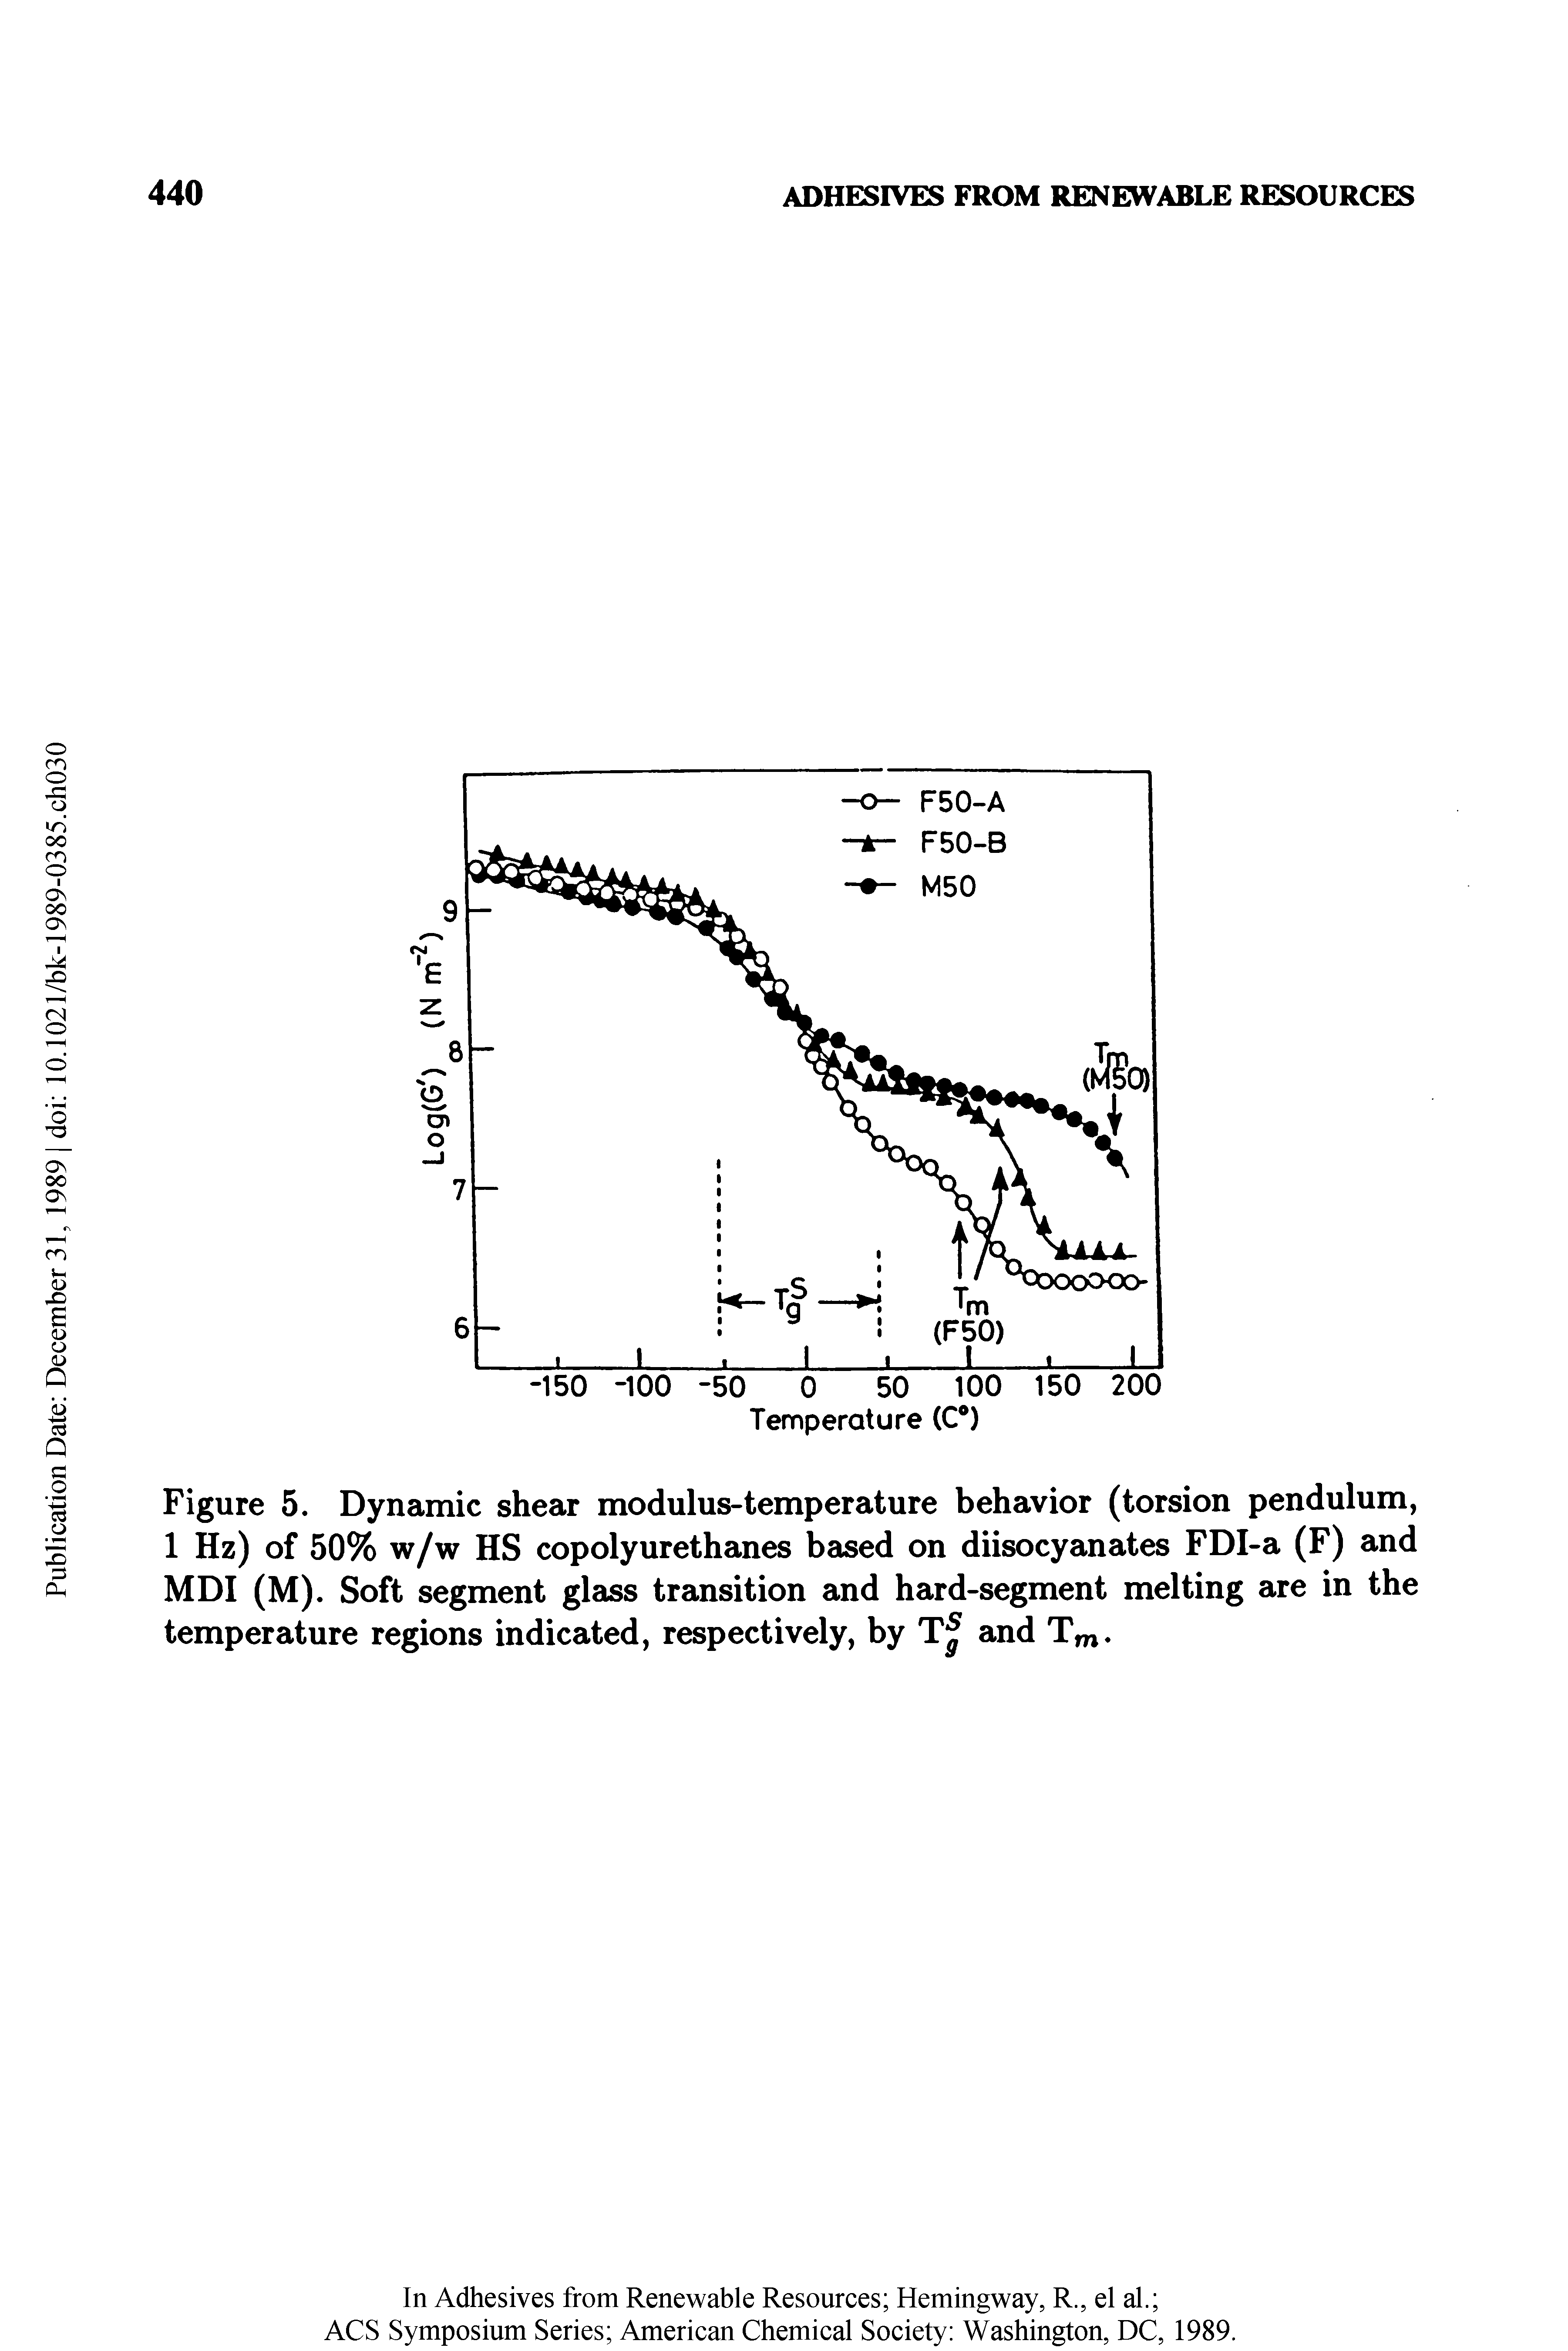 Figure 5. Dynamic shear modulus-temperature behavior (torsion pendulum, 1 Hz) of 50% w/w HS copolyurethanes based on diisocyanates FDI-a (F) and MDI (M). Soft segment glass transition and hard-segment melting are in the temperature regions indicated, respectively, by and Tm.